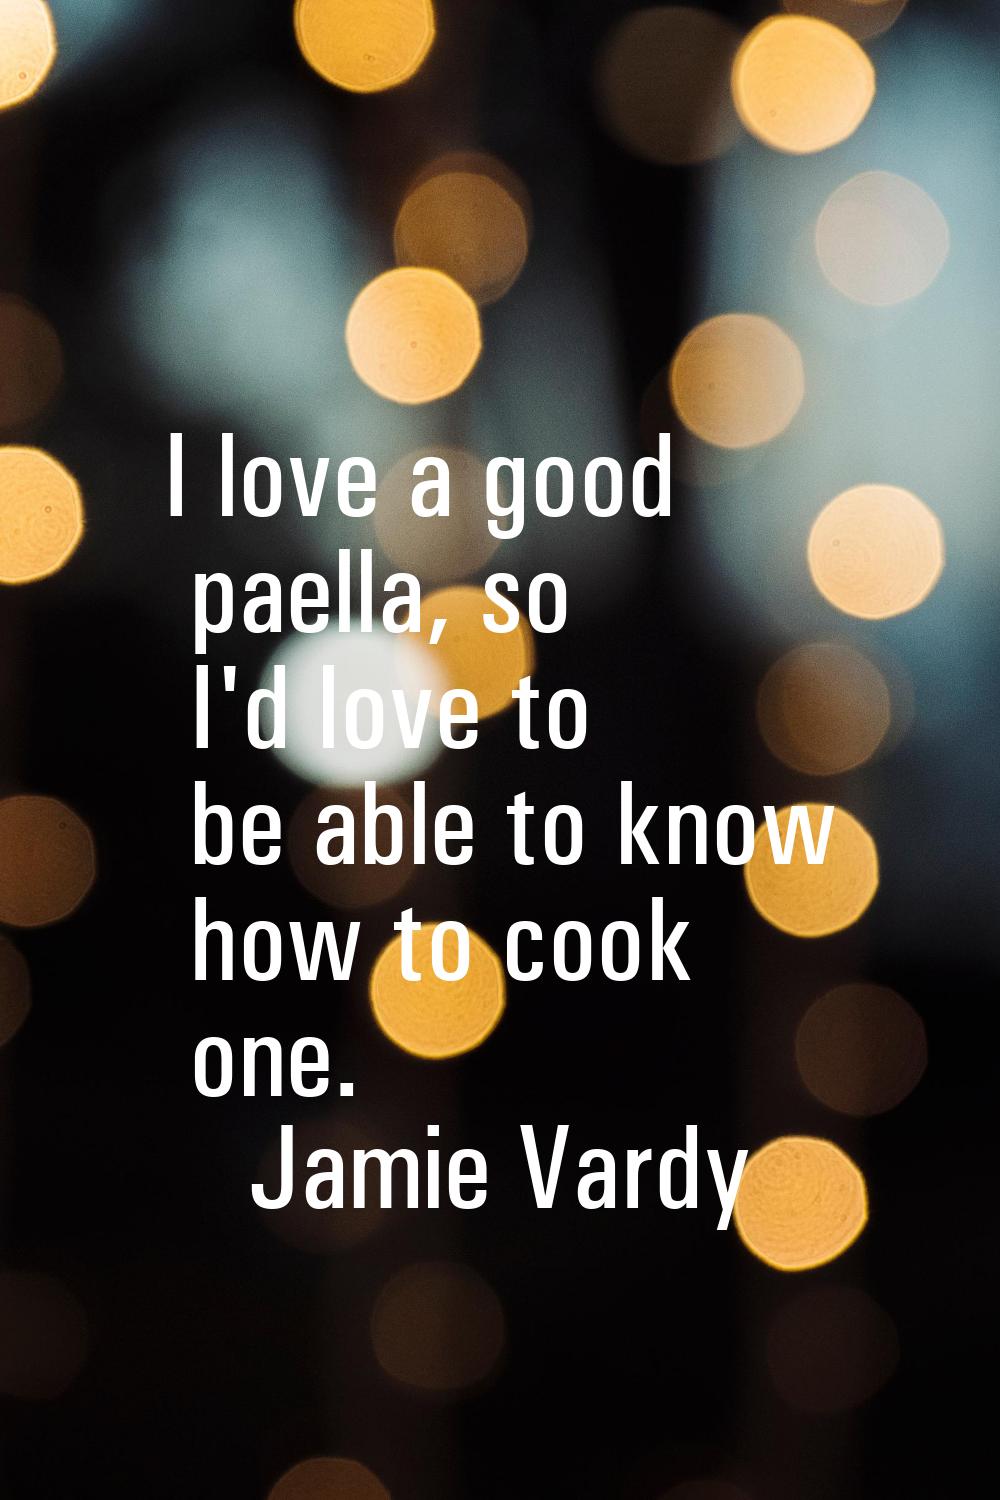 I love a good paella, so I'd love to be able to know how to cook one.